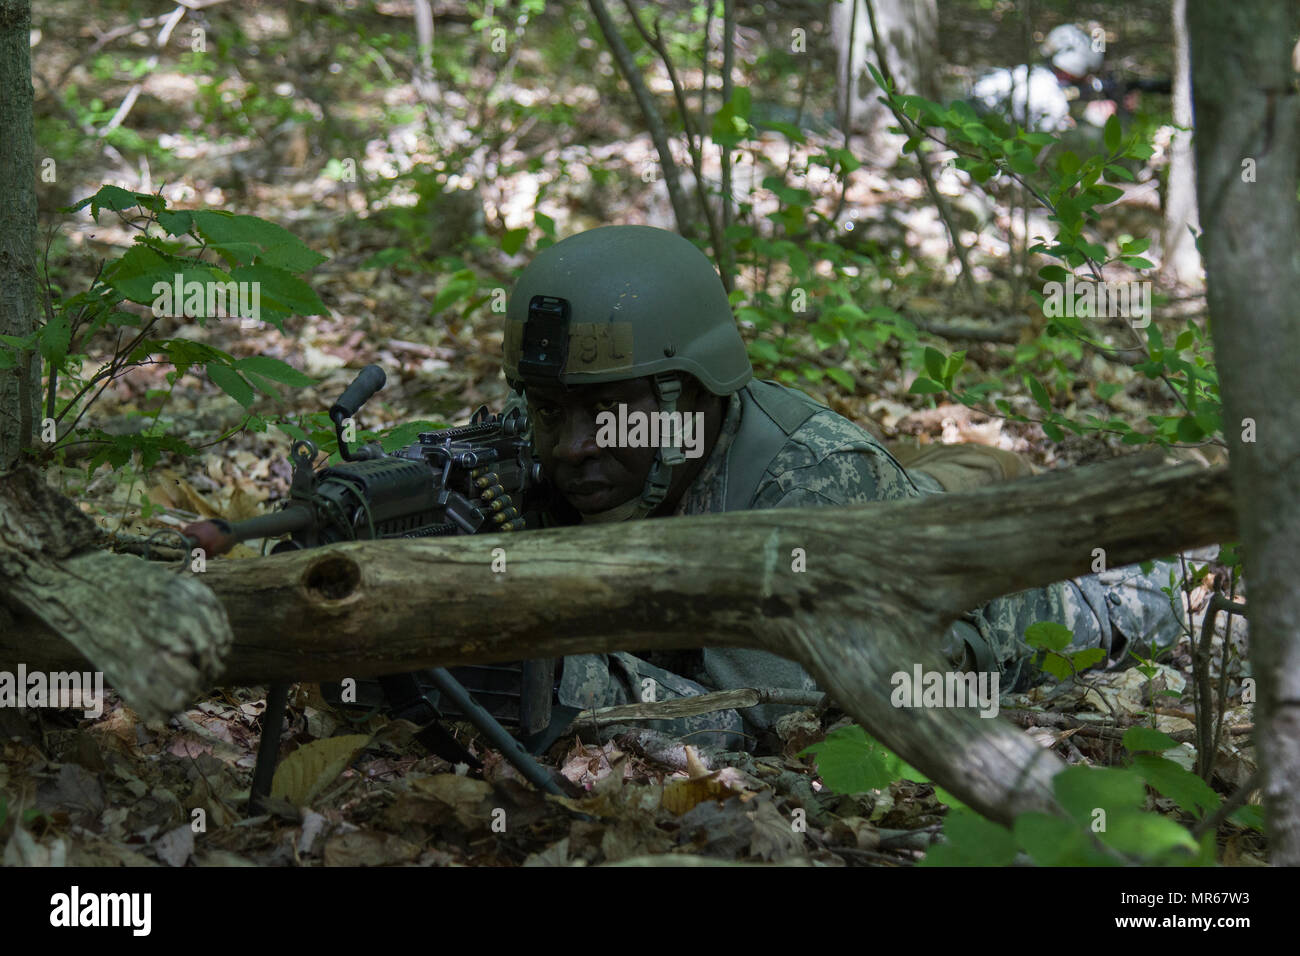 U.S. Army Officer Candidate Isaac Abotsi, assigned to the Hotel Company, 2nd Modular Training Battalion, 124th Regiment (Regional Training Institute), Vermont National Guard, provides security during a bunker clearing lane at New Hampshire National Guard Training Site in Center Strafford, Nh., May 19, 2017. Soldiers from Connecticut, Maine, Massachusetts, New Hampshire, New Jersey, New York, Rhode Island, and Vermont participated in the Officer Candidate School Field Leadership Exercise in preparation for graduation and commission. (U.S. Army National Guard photo by Spc. Avery Cunningham) Stock Photo